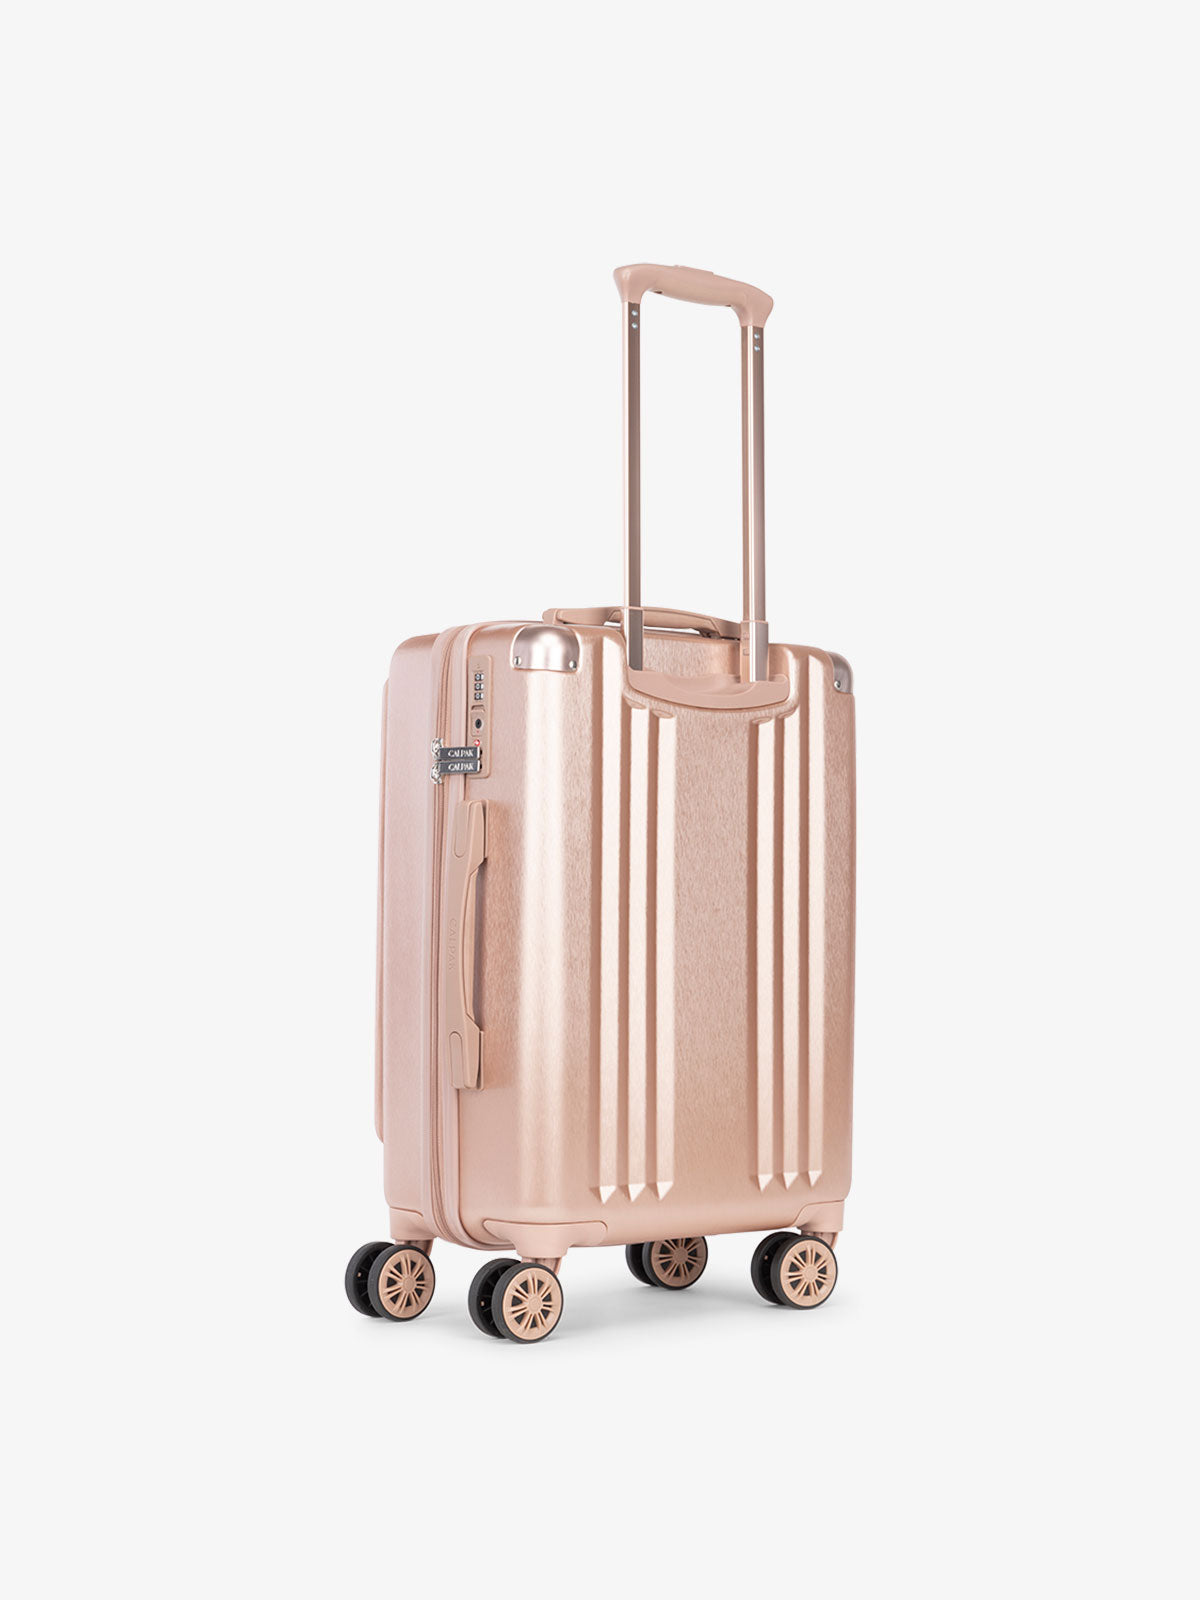 CALPAK Ambeur lightweight carry-on luggage with laptop front pocket, TSA lock and 360 spinner wheels in rose gold